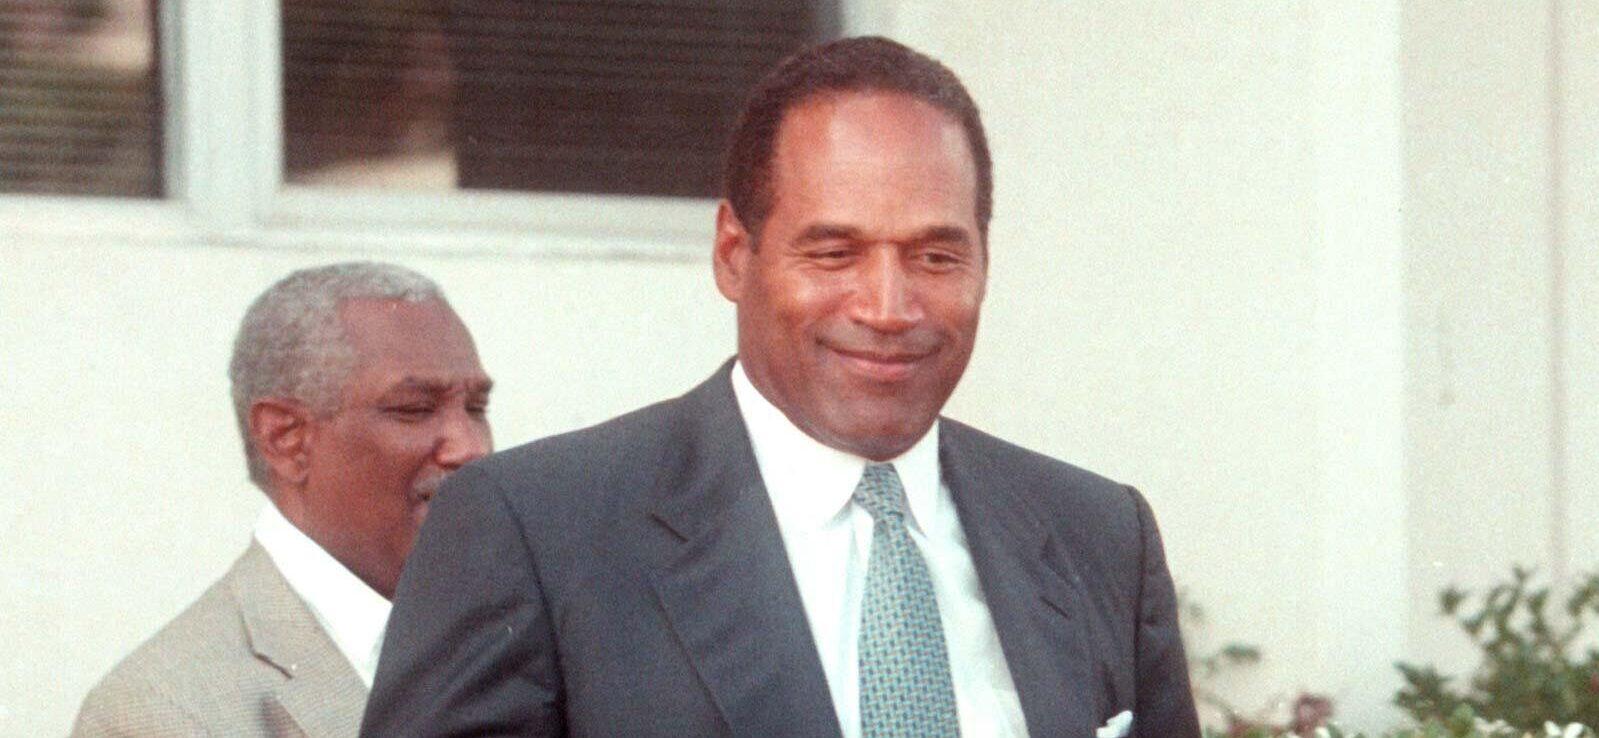 O.J. Simpson: Official Death Certificate Released, Cause Of Death Confirmed